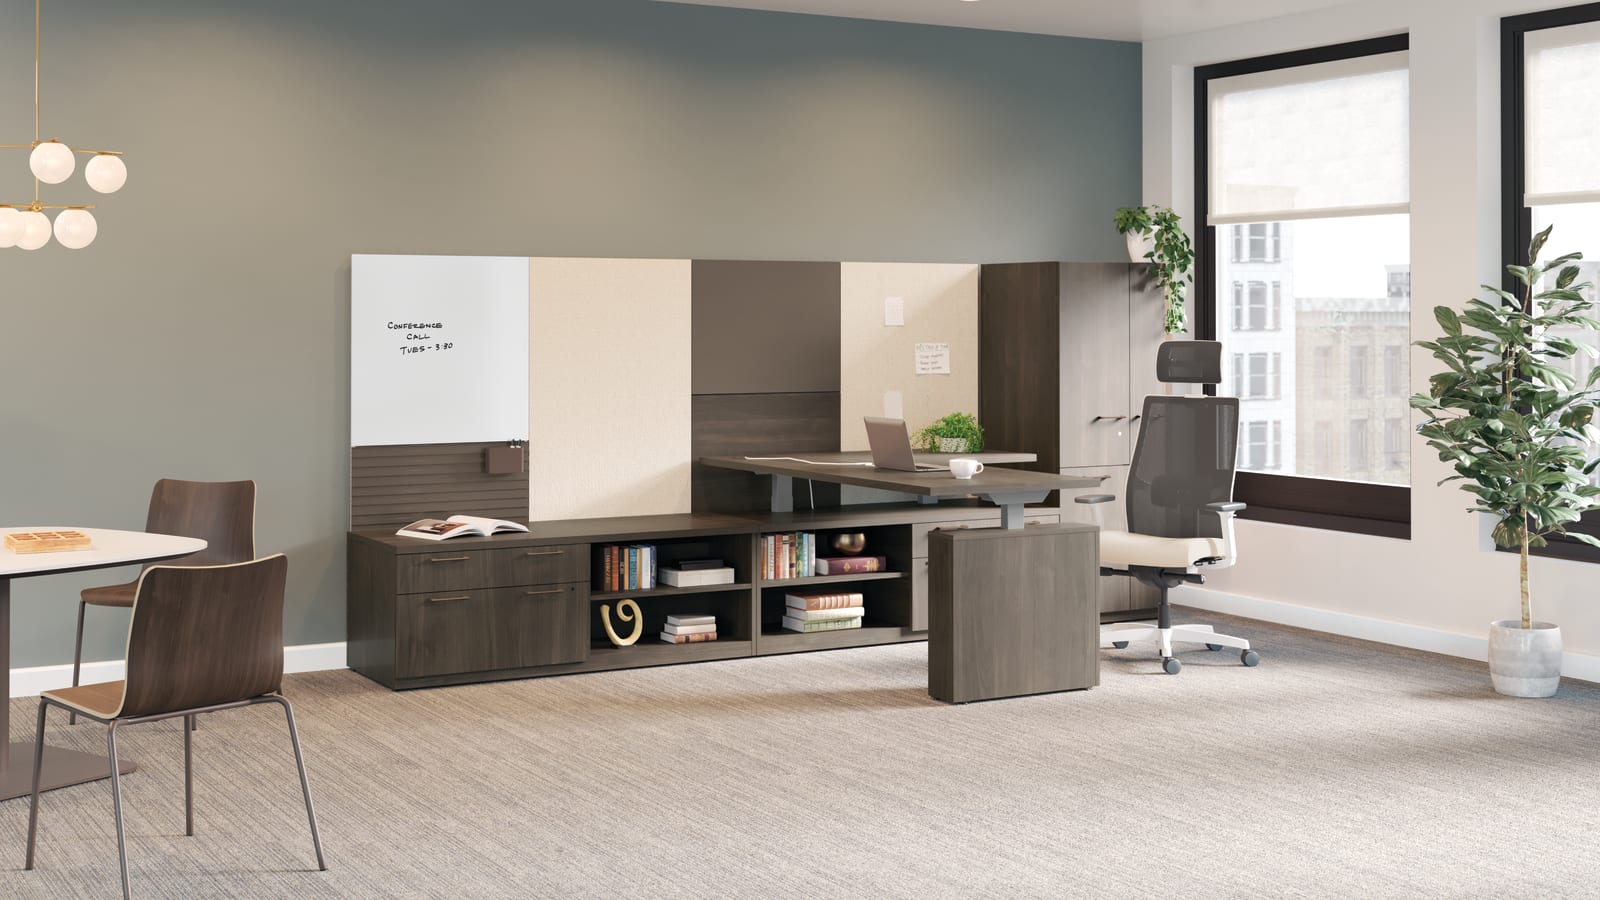 Elective Elements Freestanding Office Desk with Storage